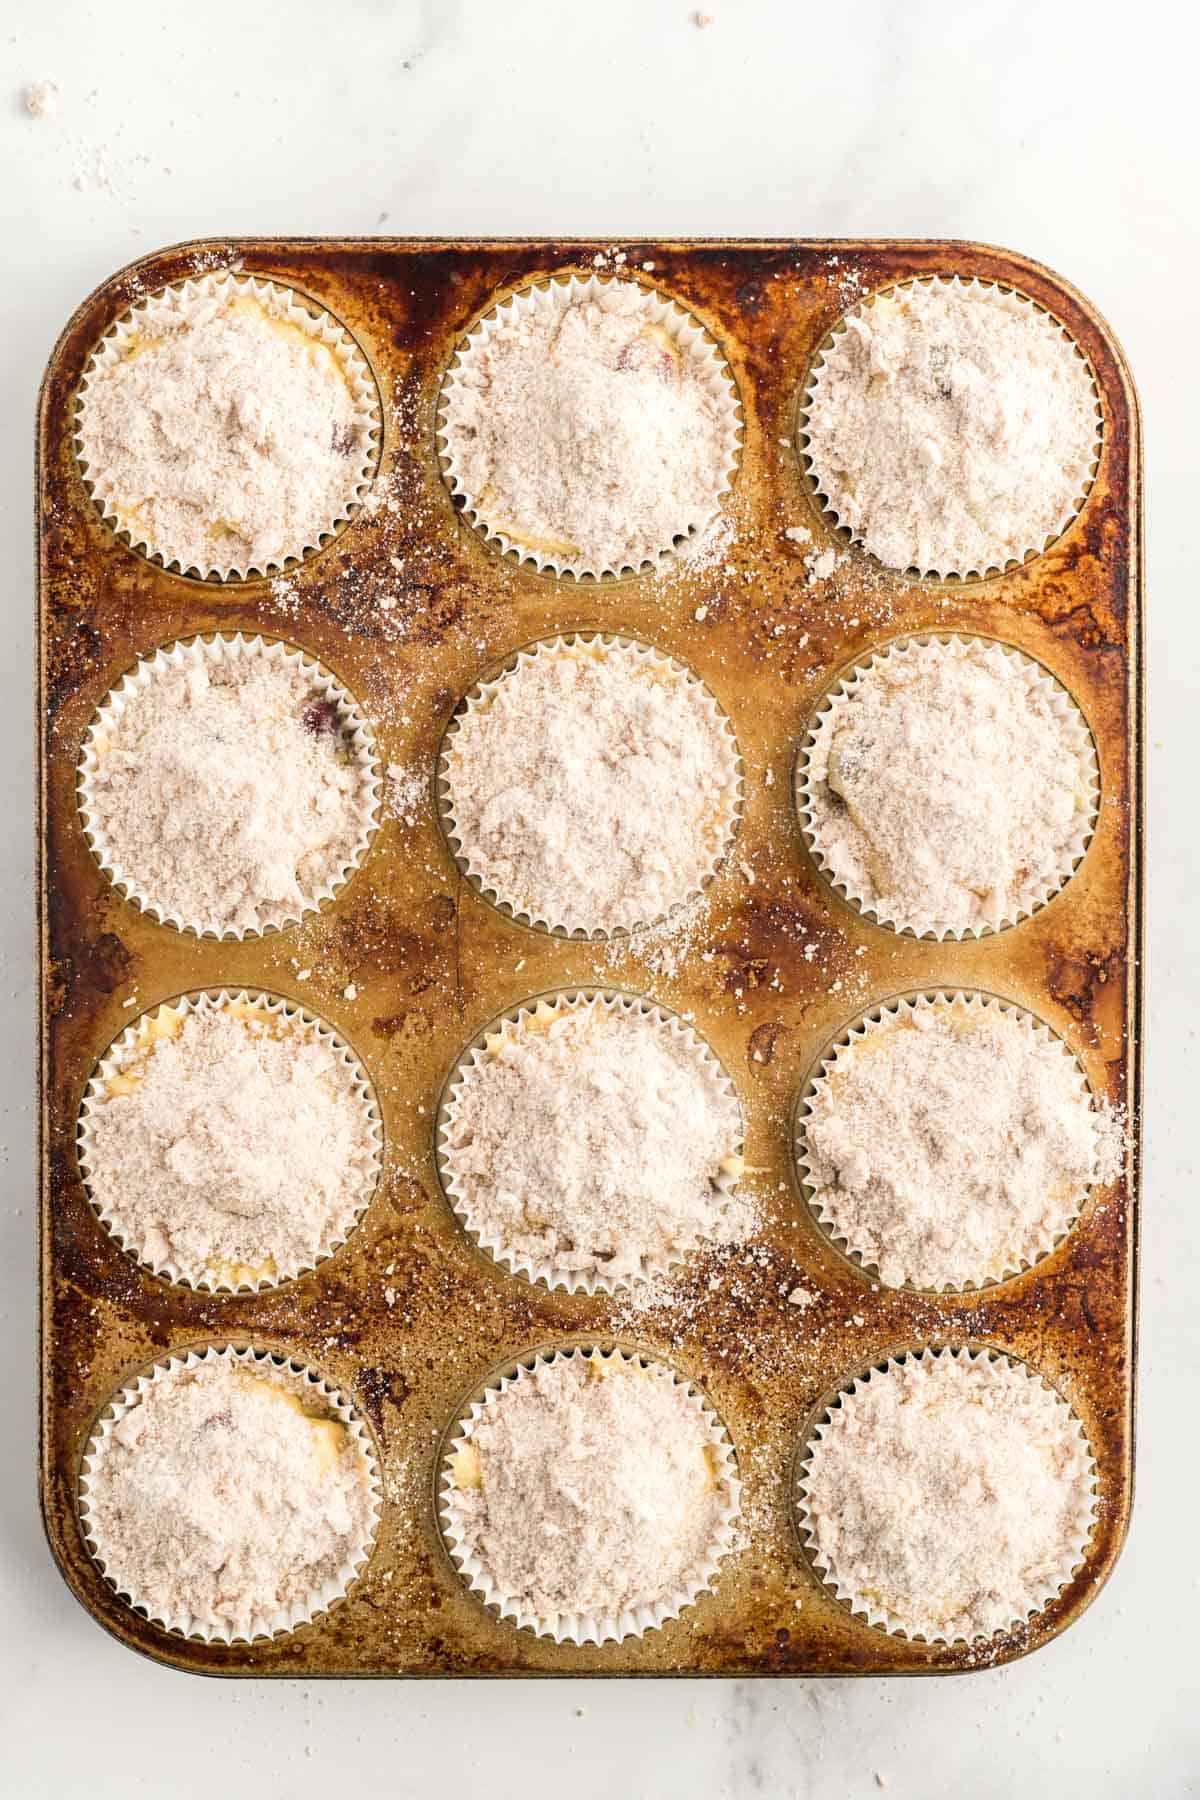 unbaked muffins in a muffin pan.